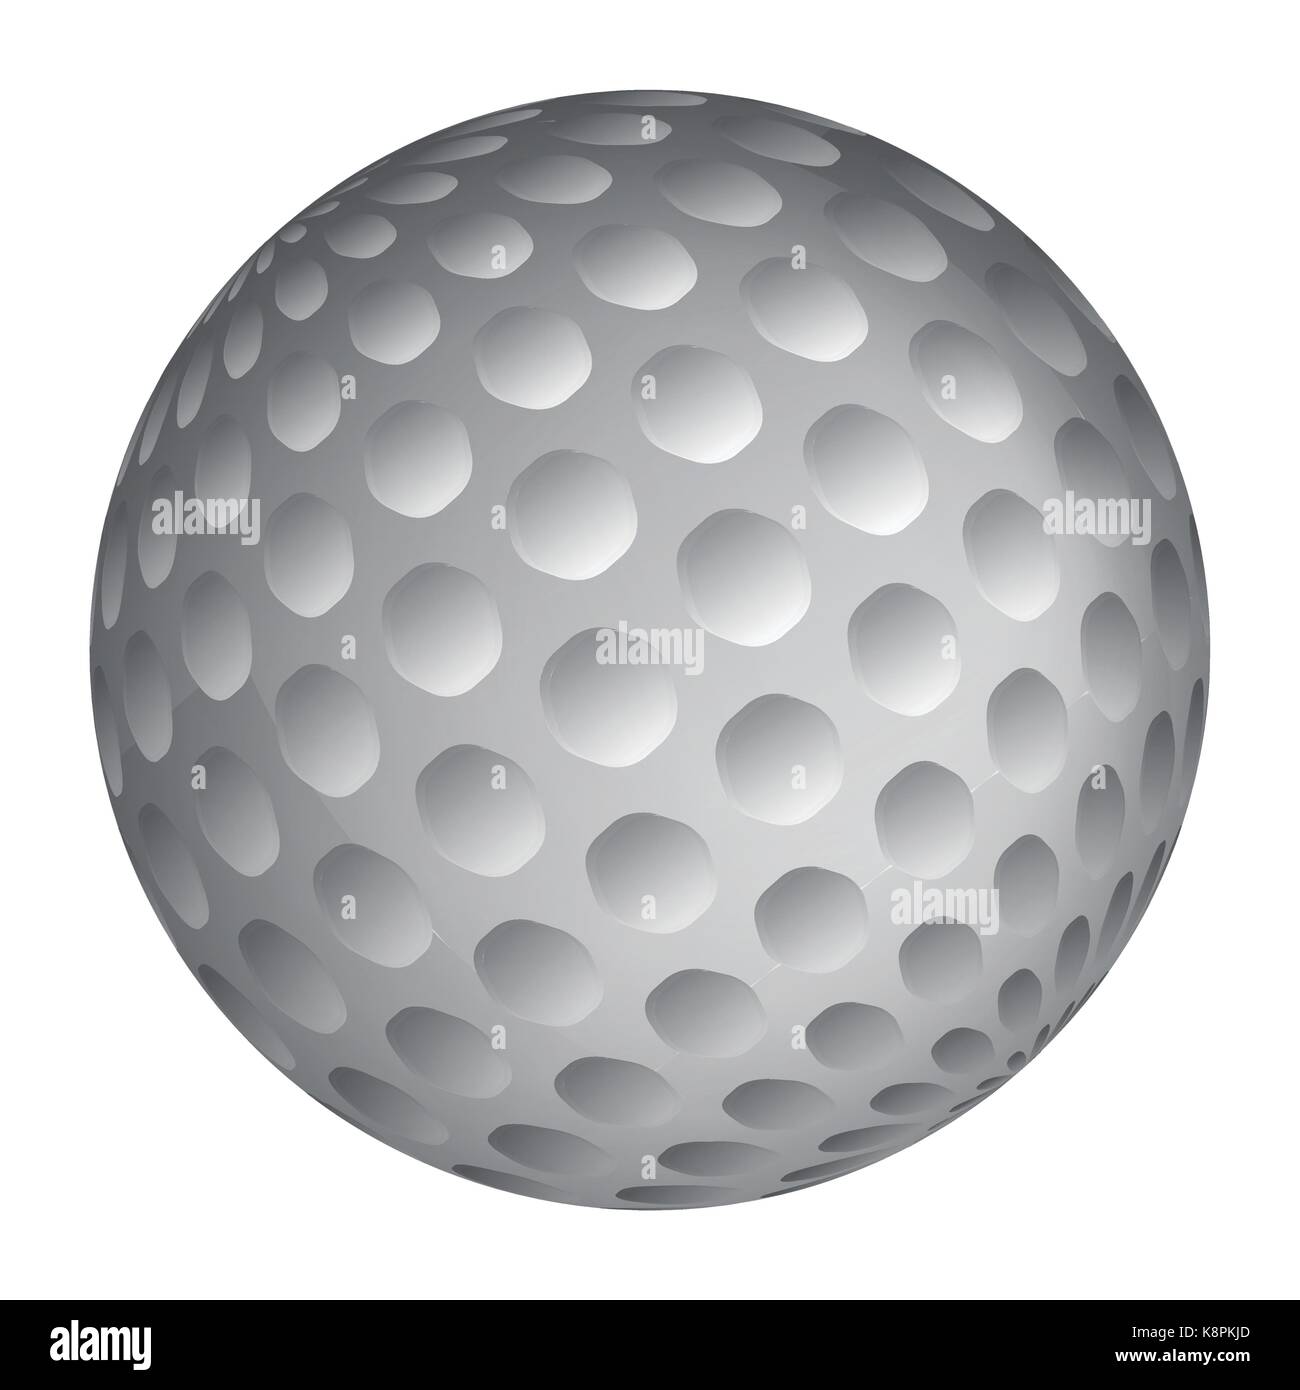 Golfball realistic vector. Image of single golf equipment, ball illustration isolated on white background. Stock Vector